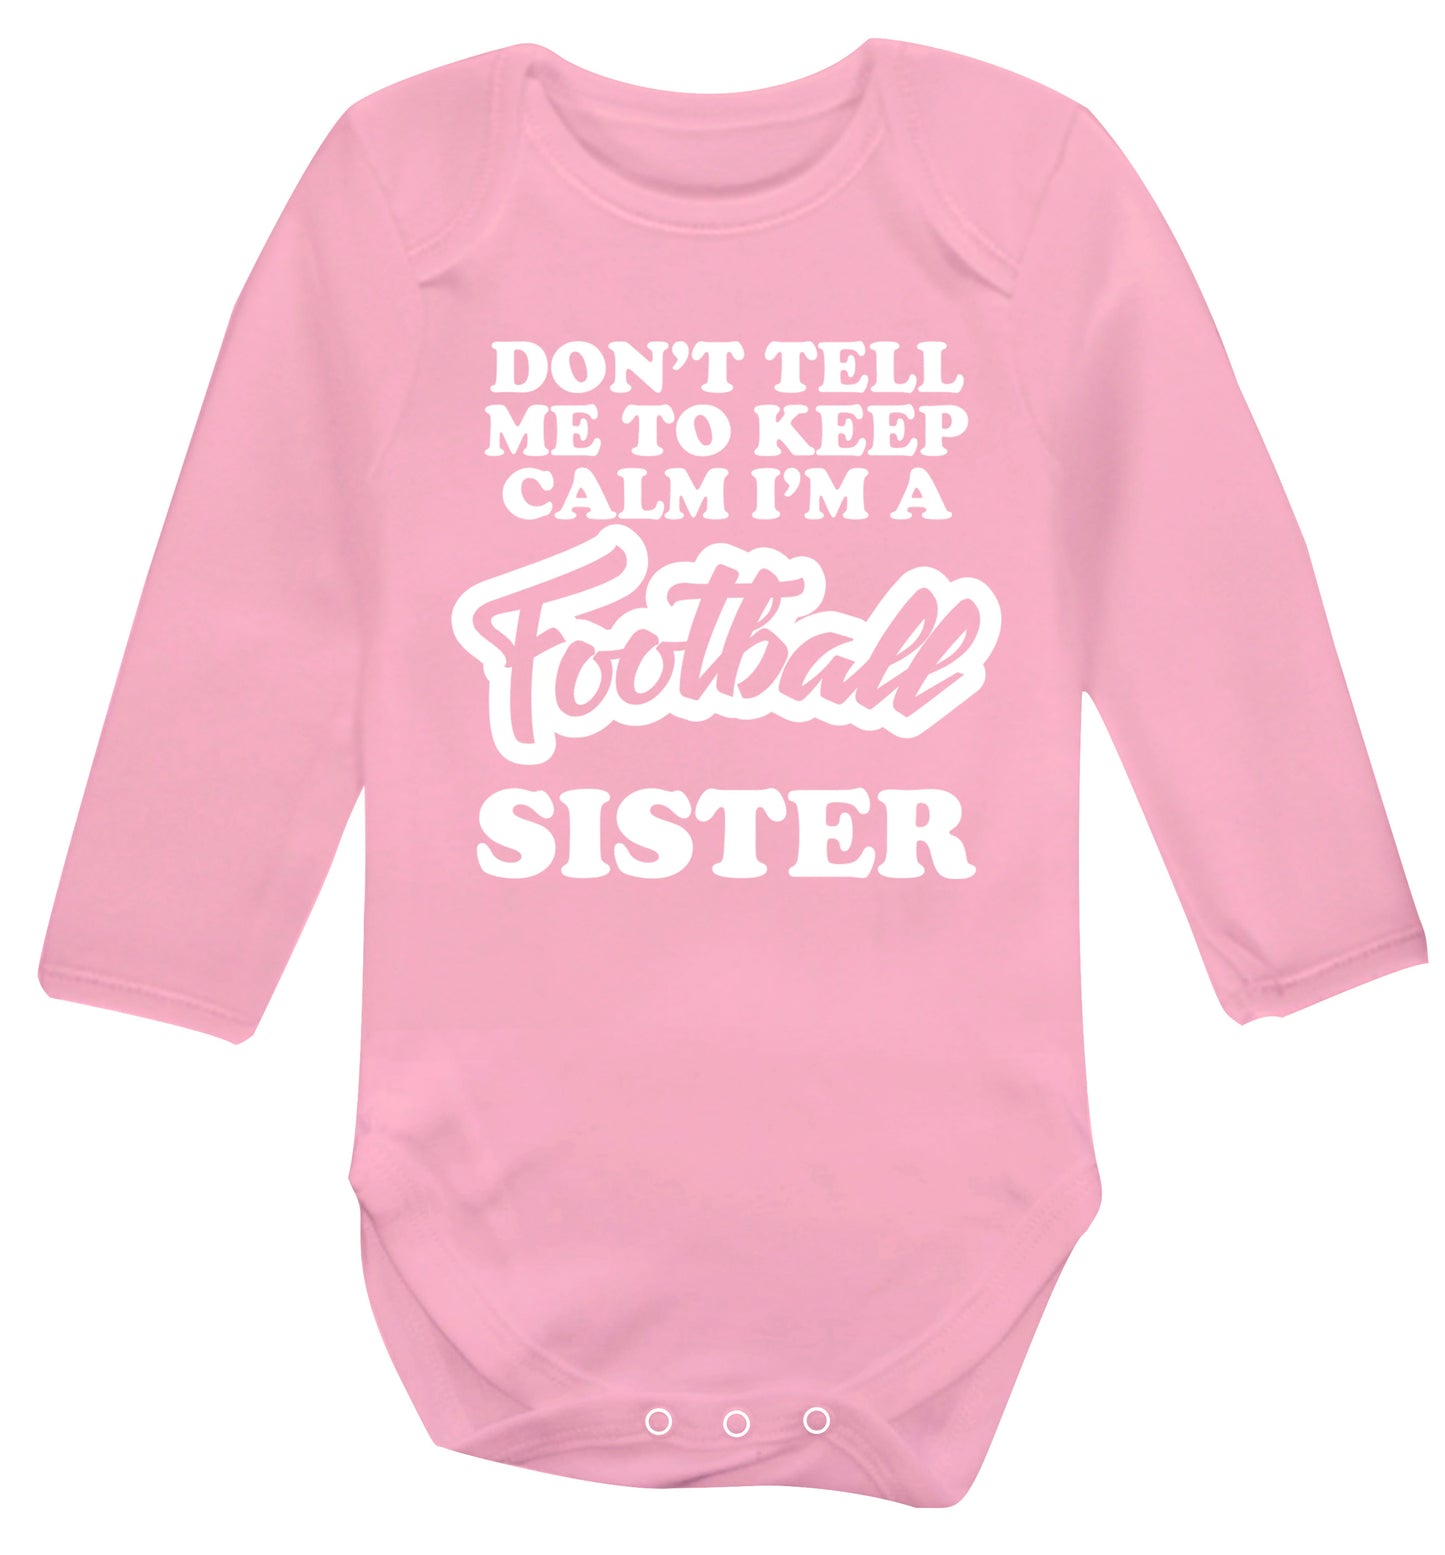 Don't tell me to keep calm I'm a football sister Baby Vest long sleeved pale pink 6-12 months